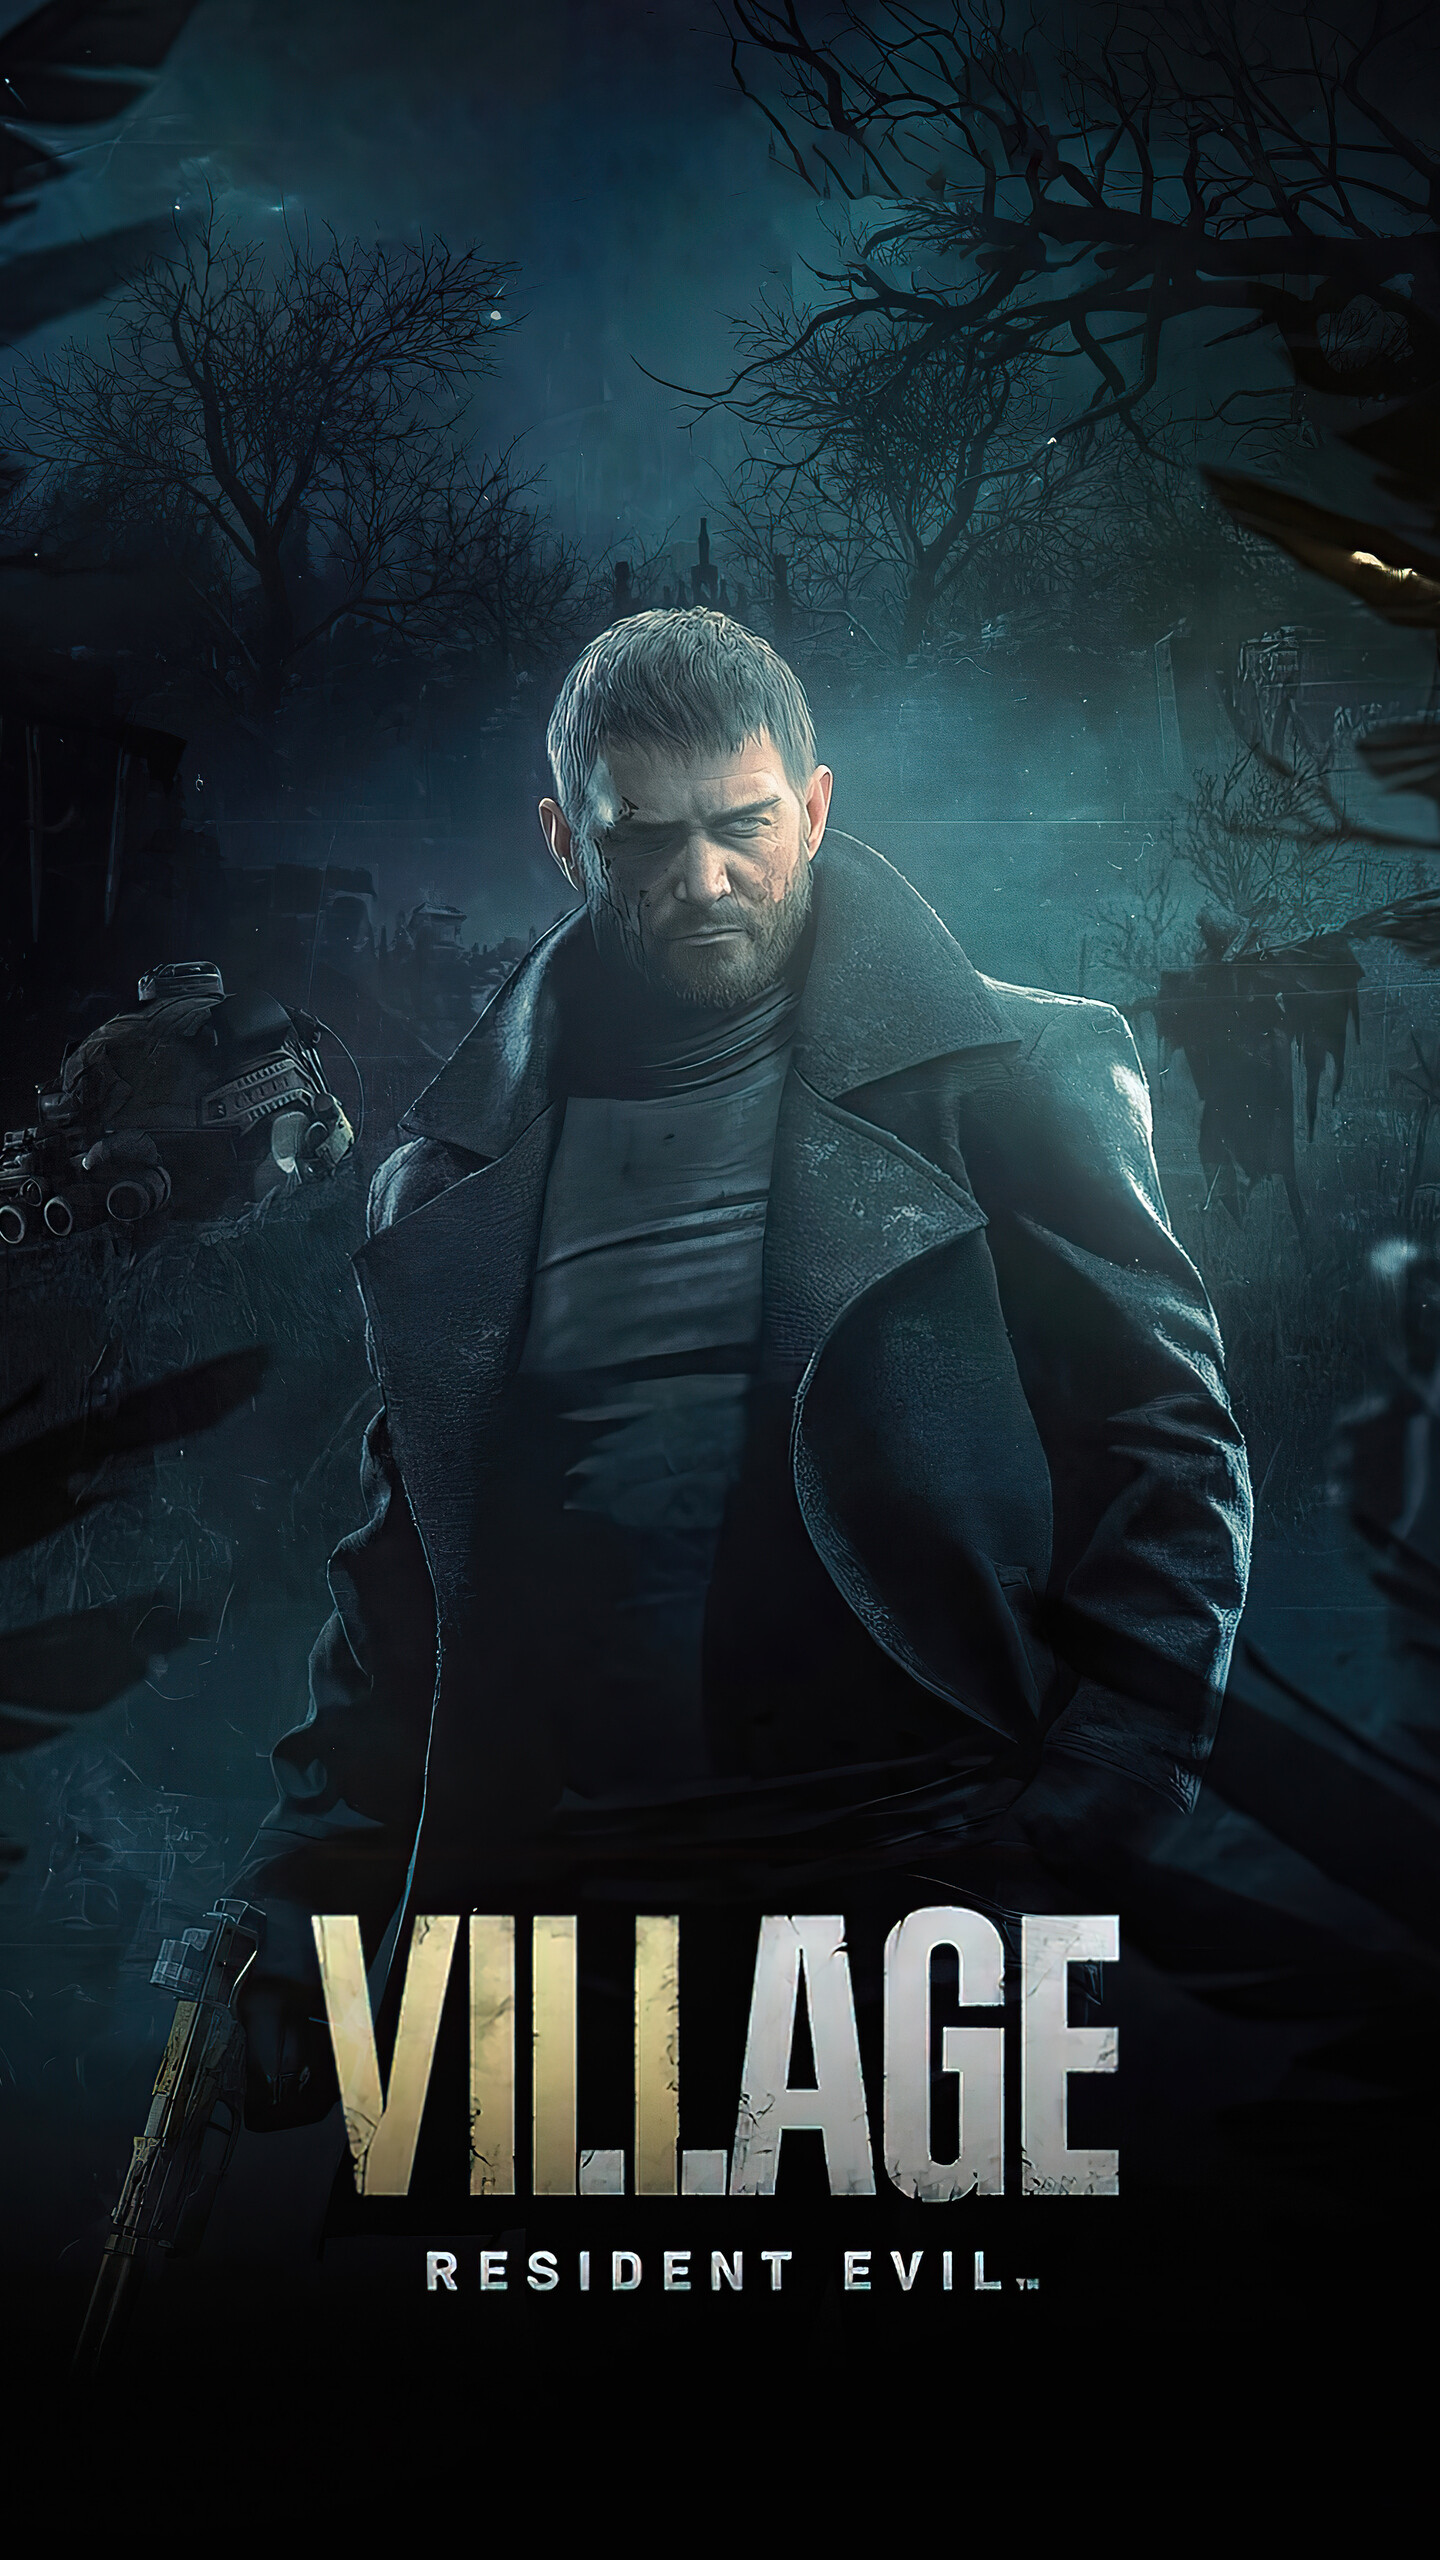 Resident Evil Village: A survival-horror action game in which players assume the role of a man searching for his missing daughter through a wintry village. 1440x2560 HD Background.